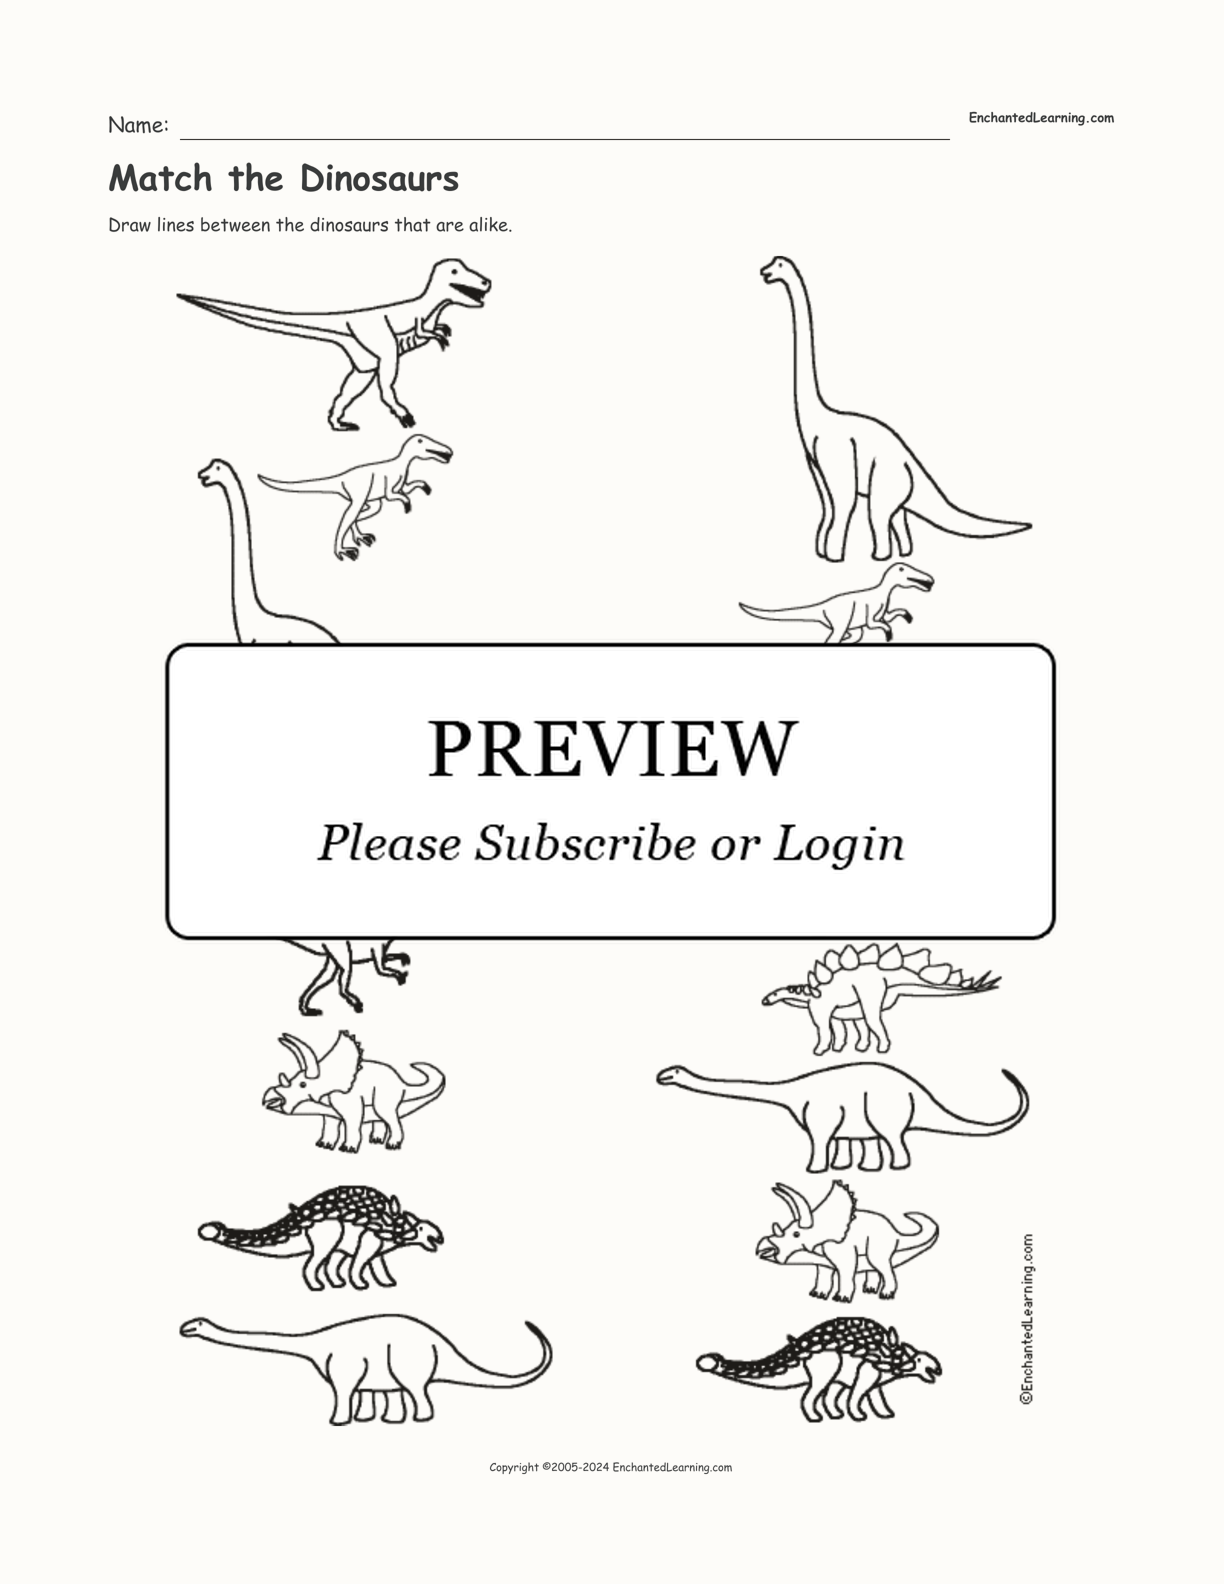 Match the Dinosaurs interactive worksheet page 1